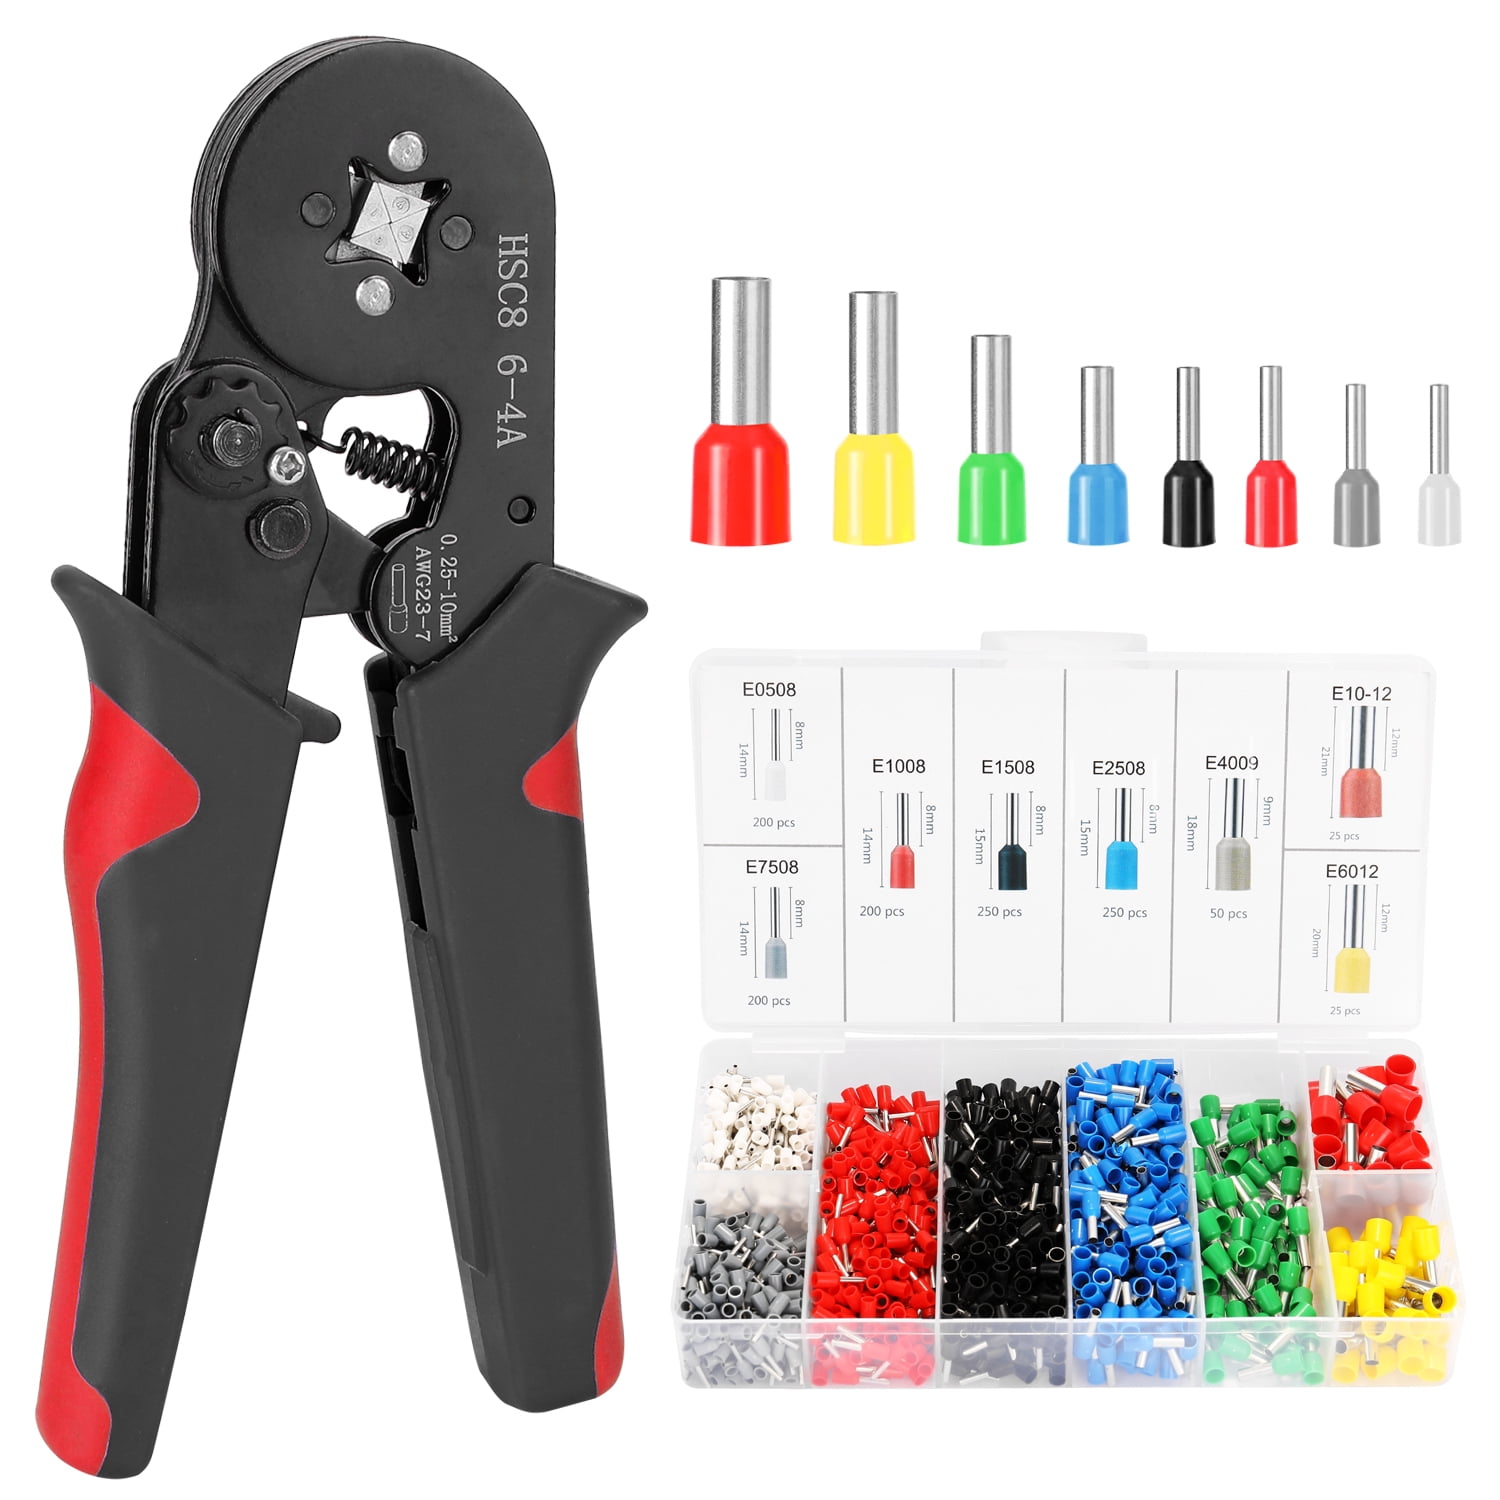 Steel Ratchet Crimper Plier Crimping Tool Cable Wire Electrical Terminals Kit 